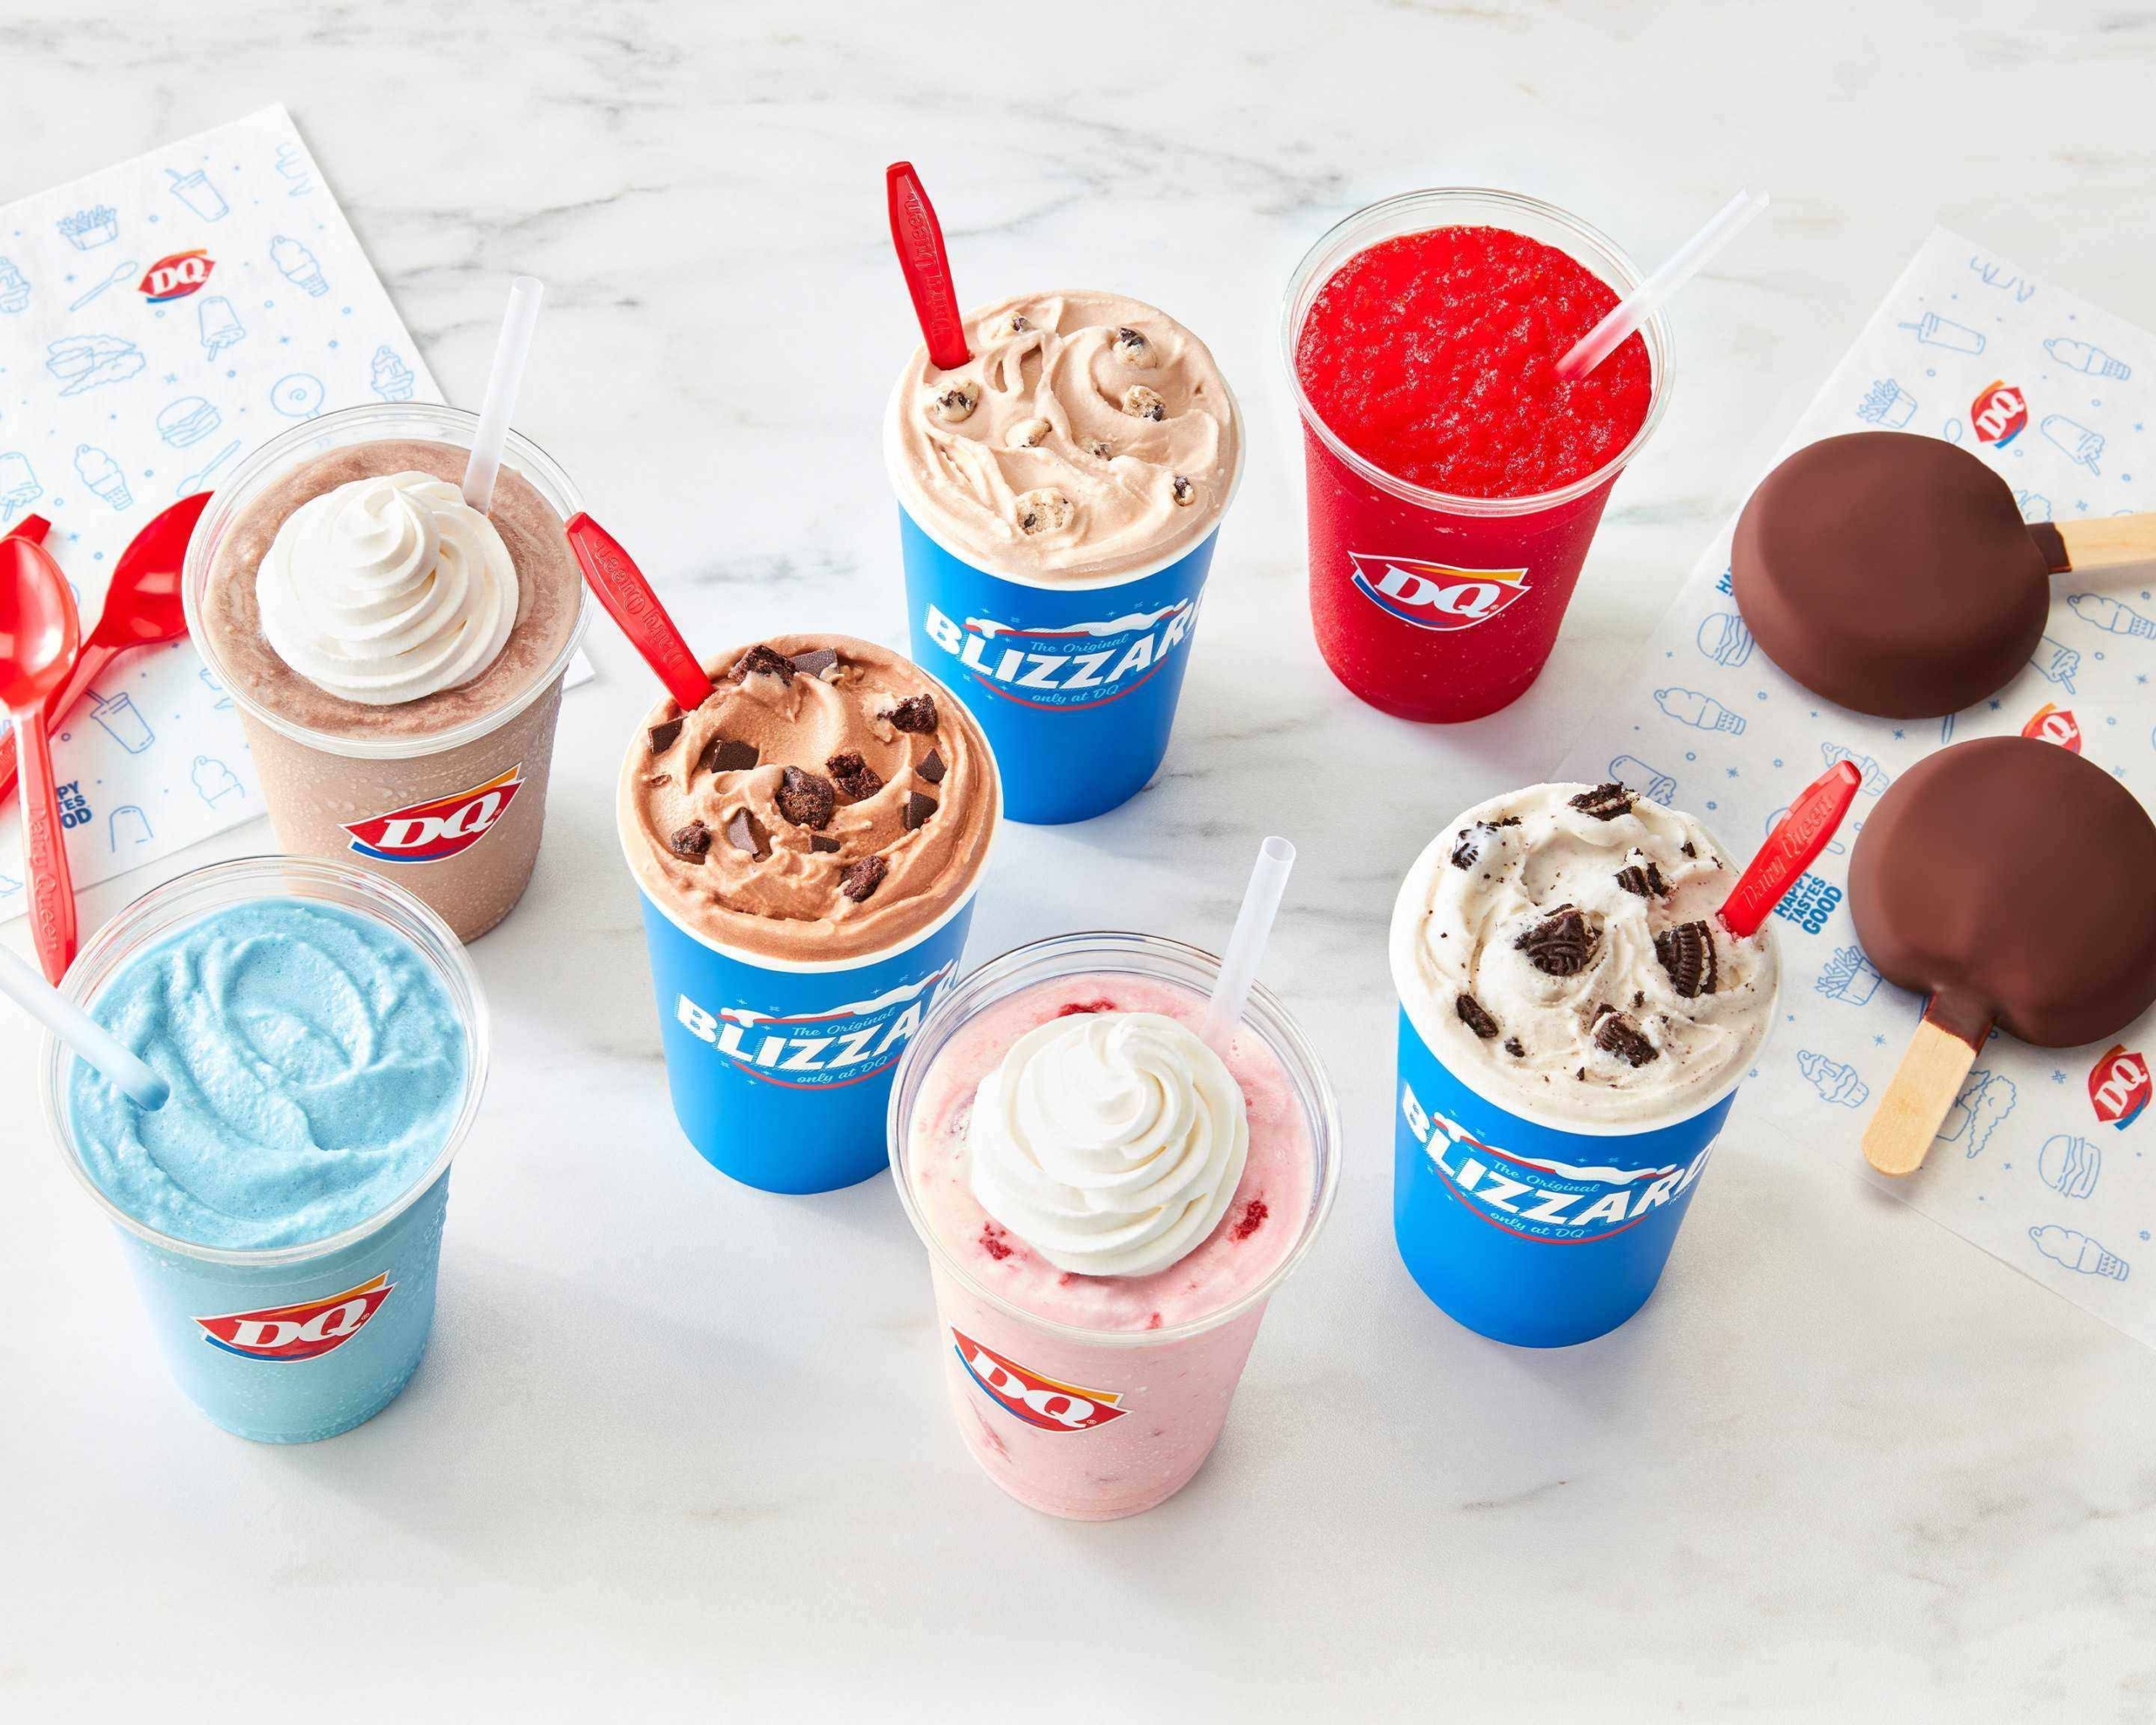 Array of dairy queen frozen goods on white marble surface